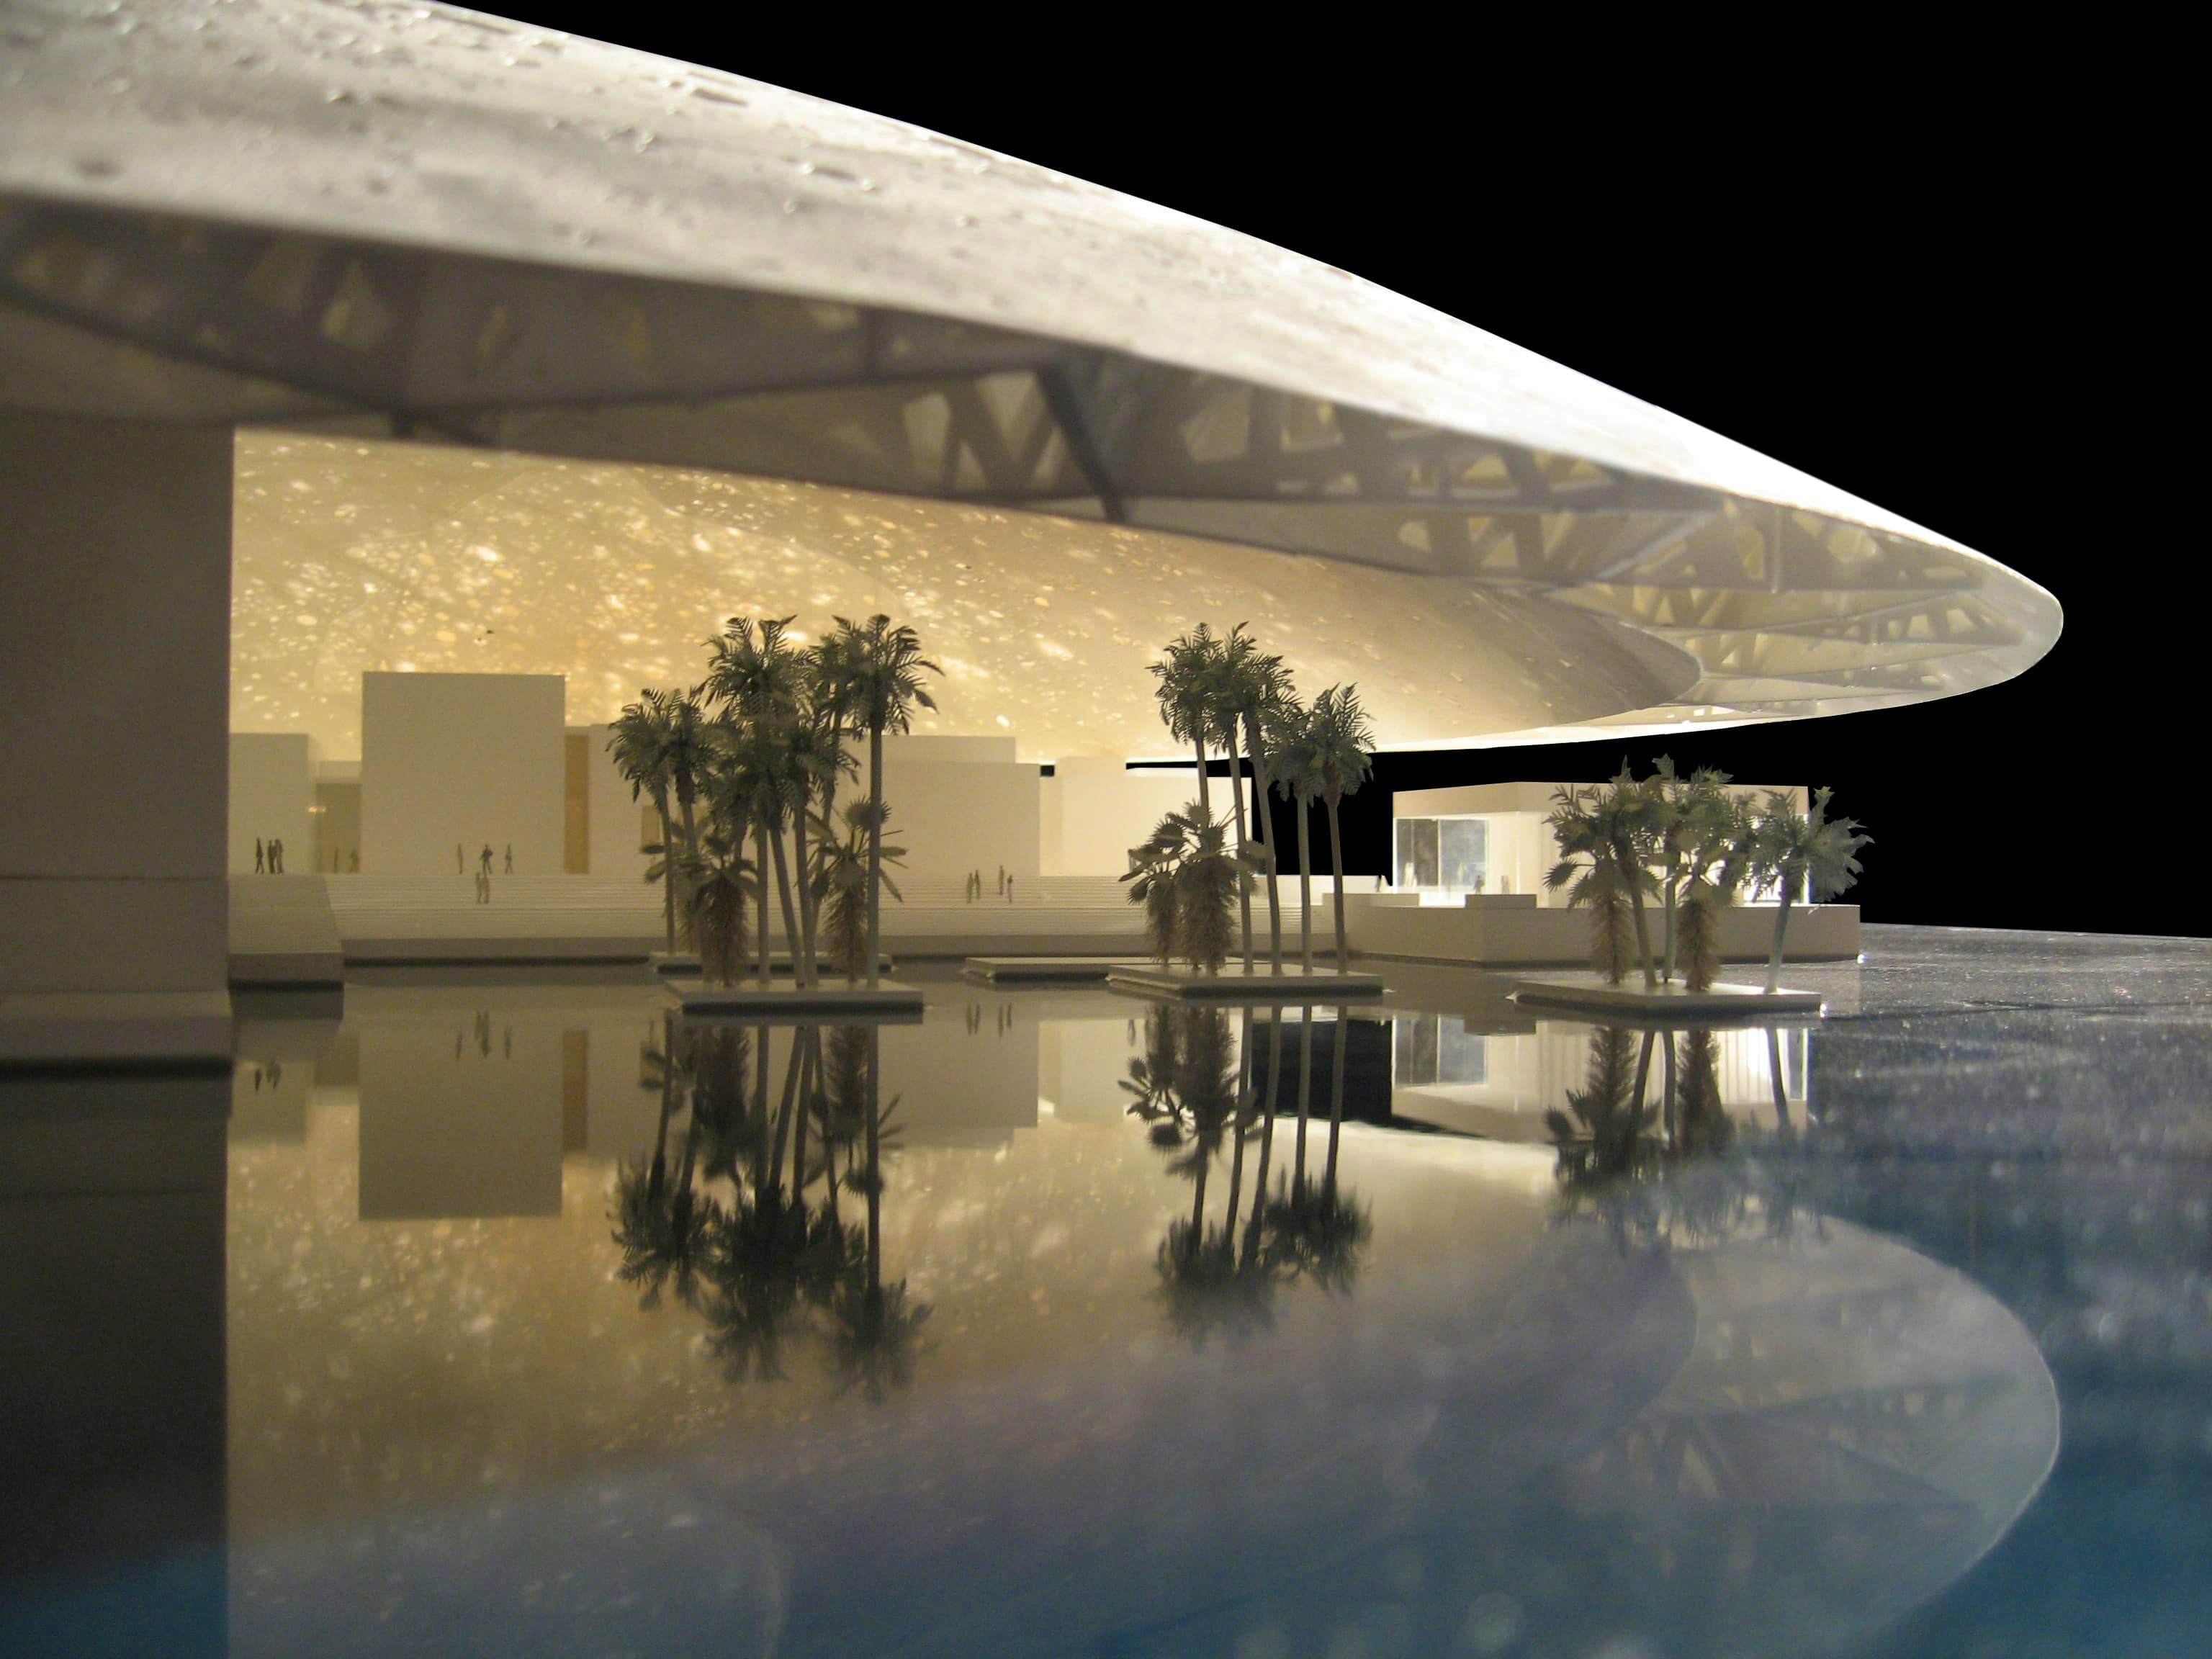 Louvre Museum at Abu Dhabi (operates on Mon, Wed, Sat ) Tickets Only